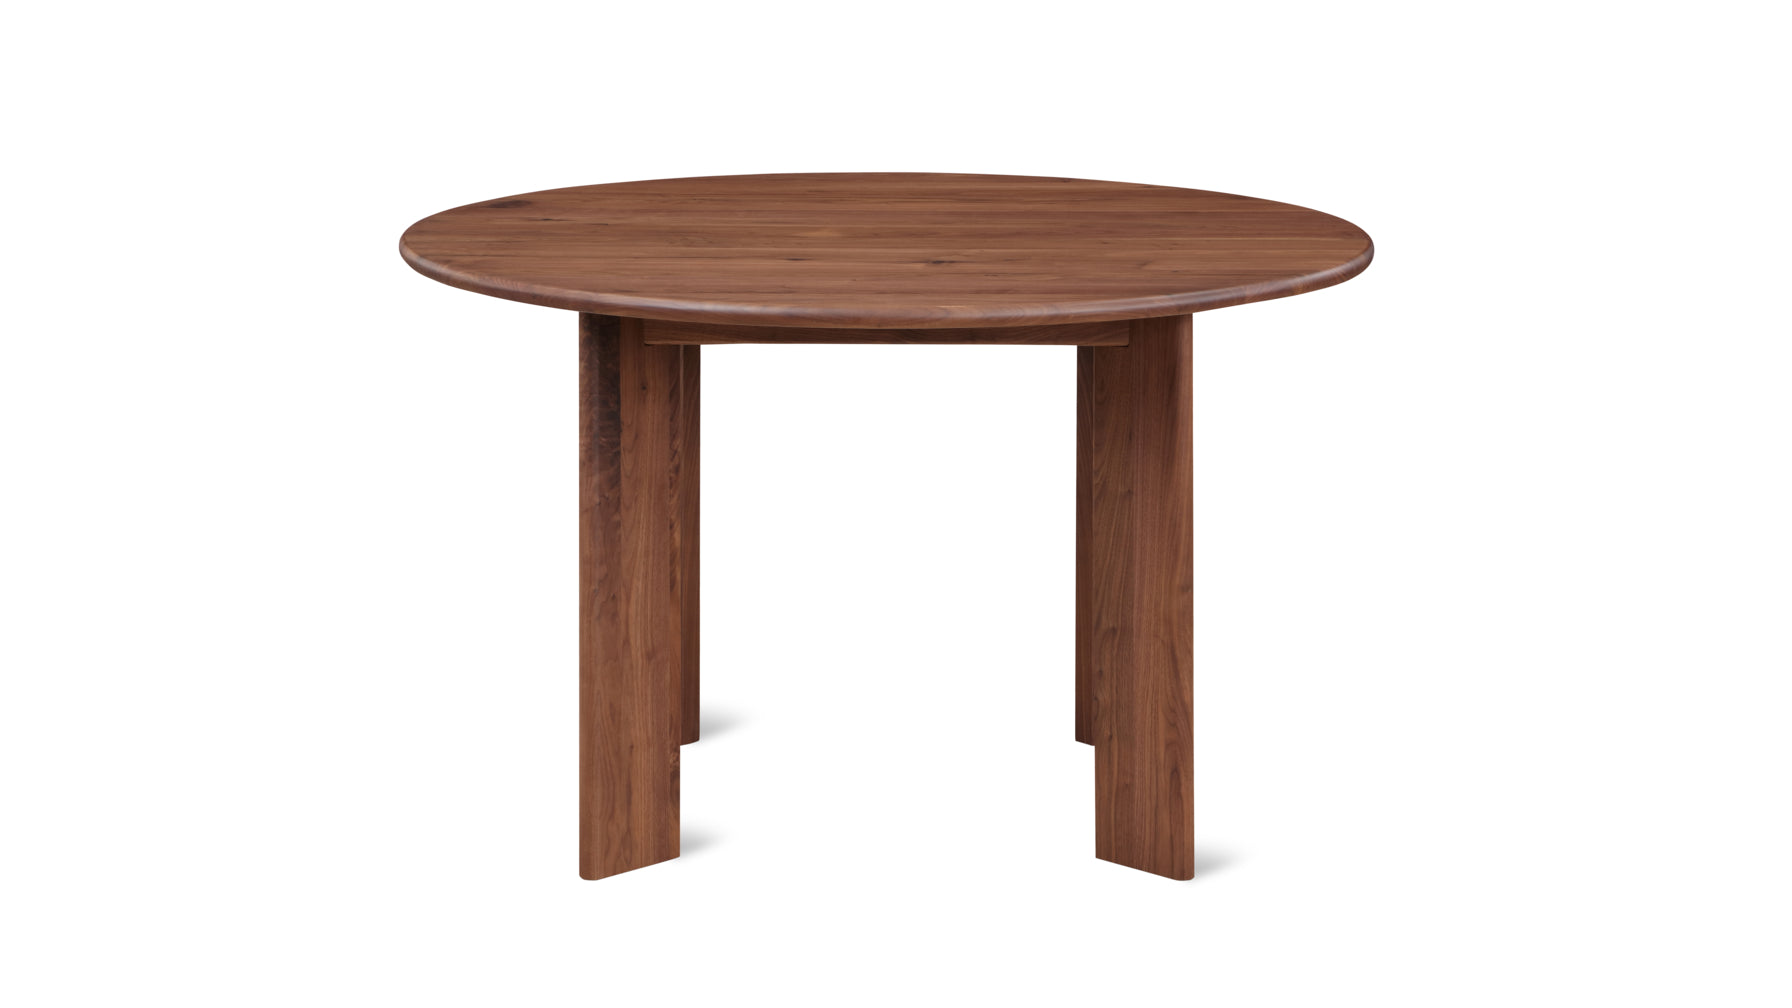 Frame Round Dining Table, Seats 4-5 People, American Walnut - Image 4